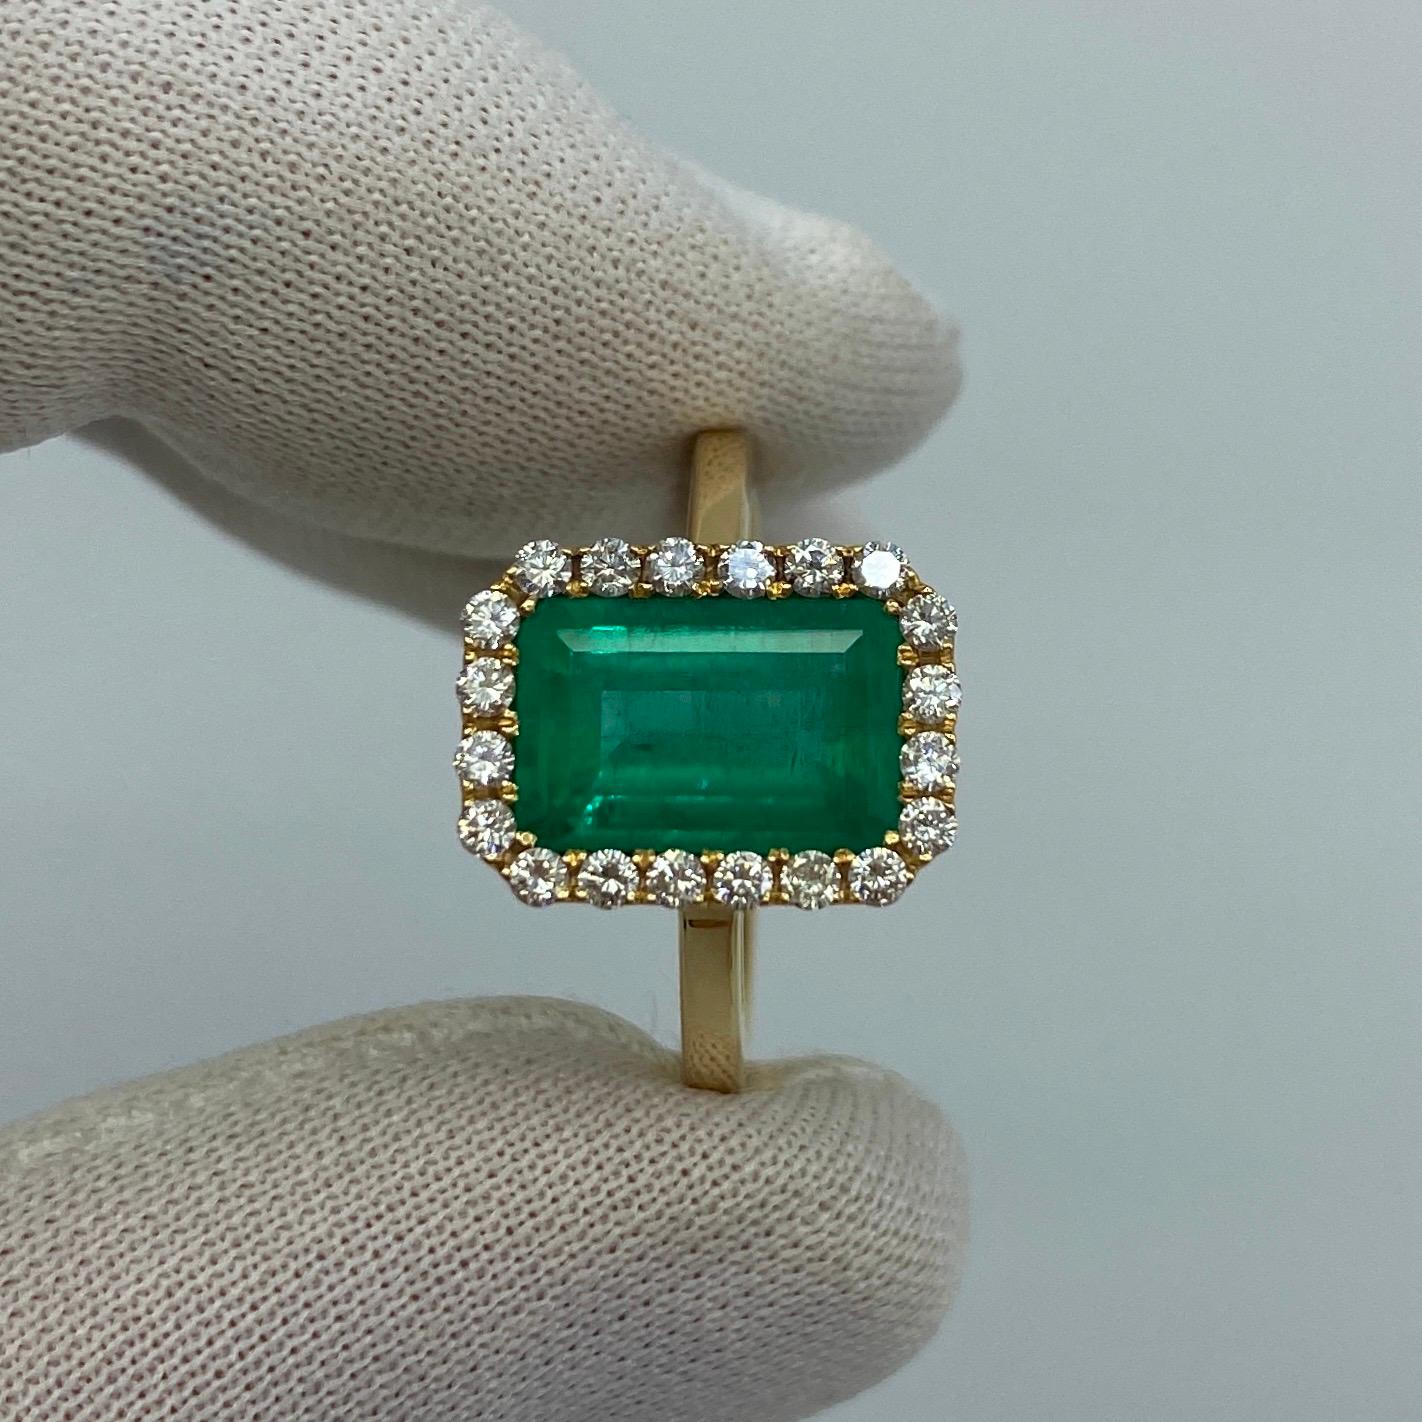 GIA Certified Vivid Green 3.06 Total Carat Colombian Emerald & Diamond 18k Yellow Gold Halo Ring.

Large 2.72 carat emerald with a stunning intense vivid green colour and very good clarity.
There are some natural inclusions, as to be expected with